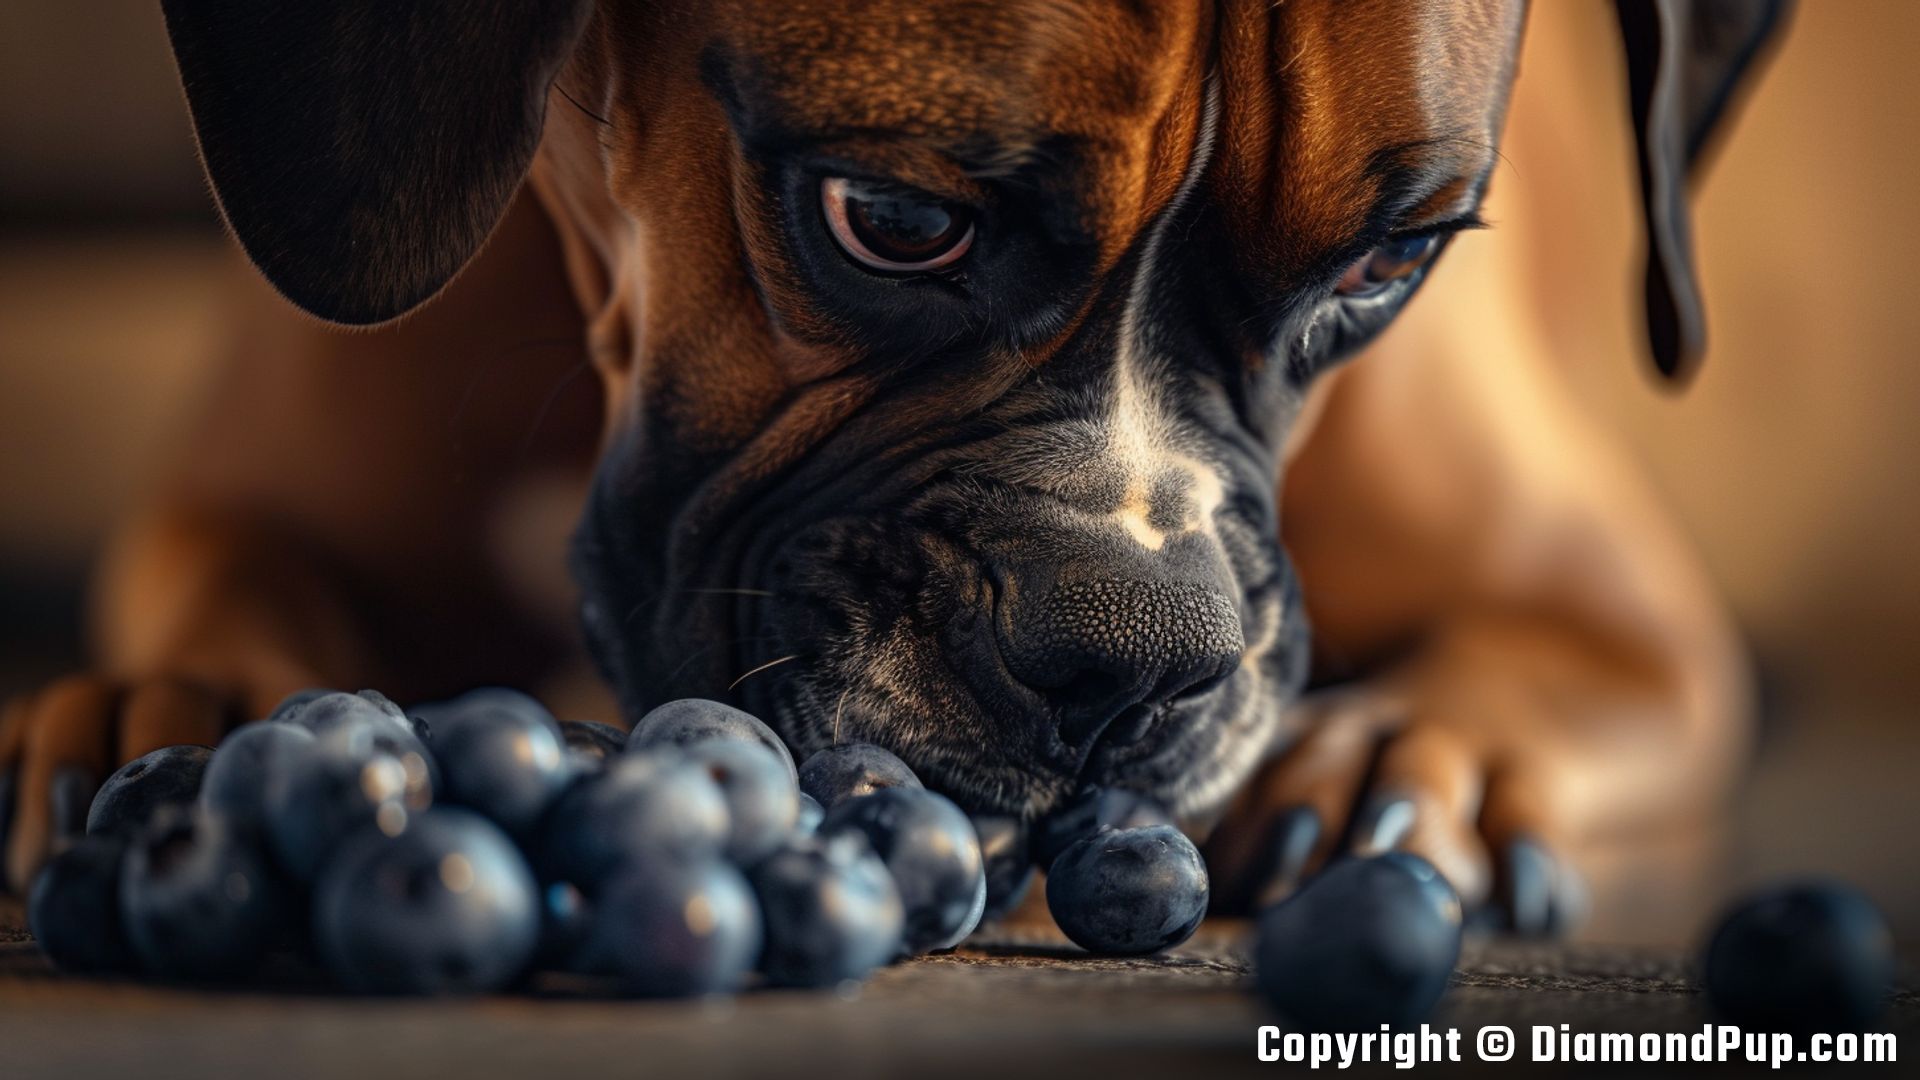 Picture of an Adorable Boxer Eating Blueberries